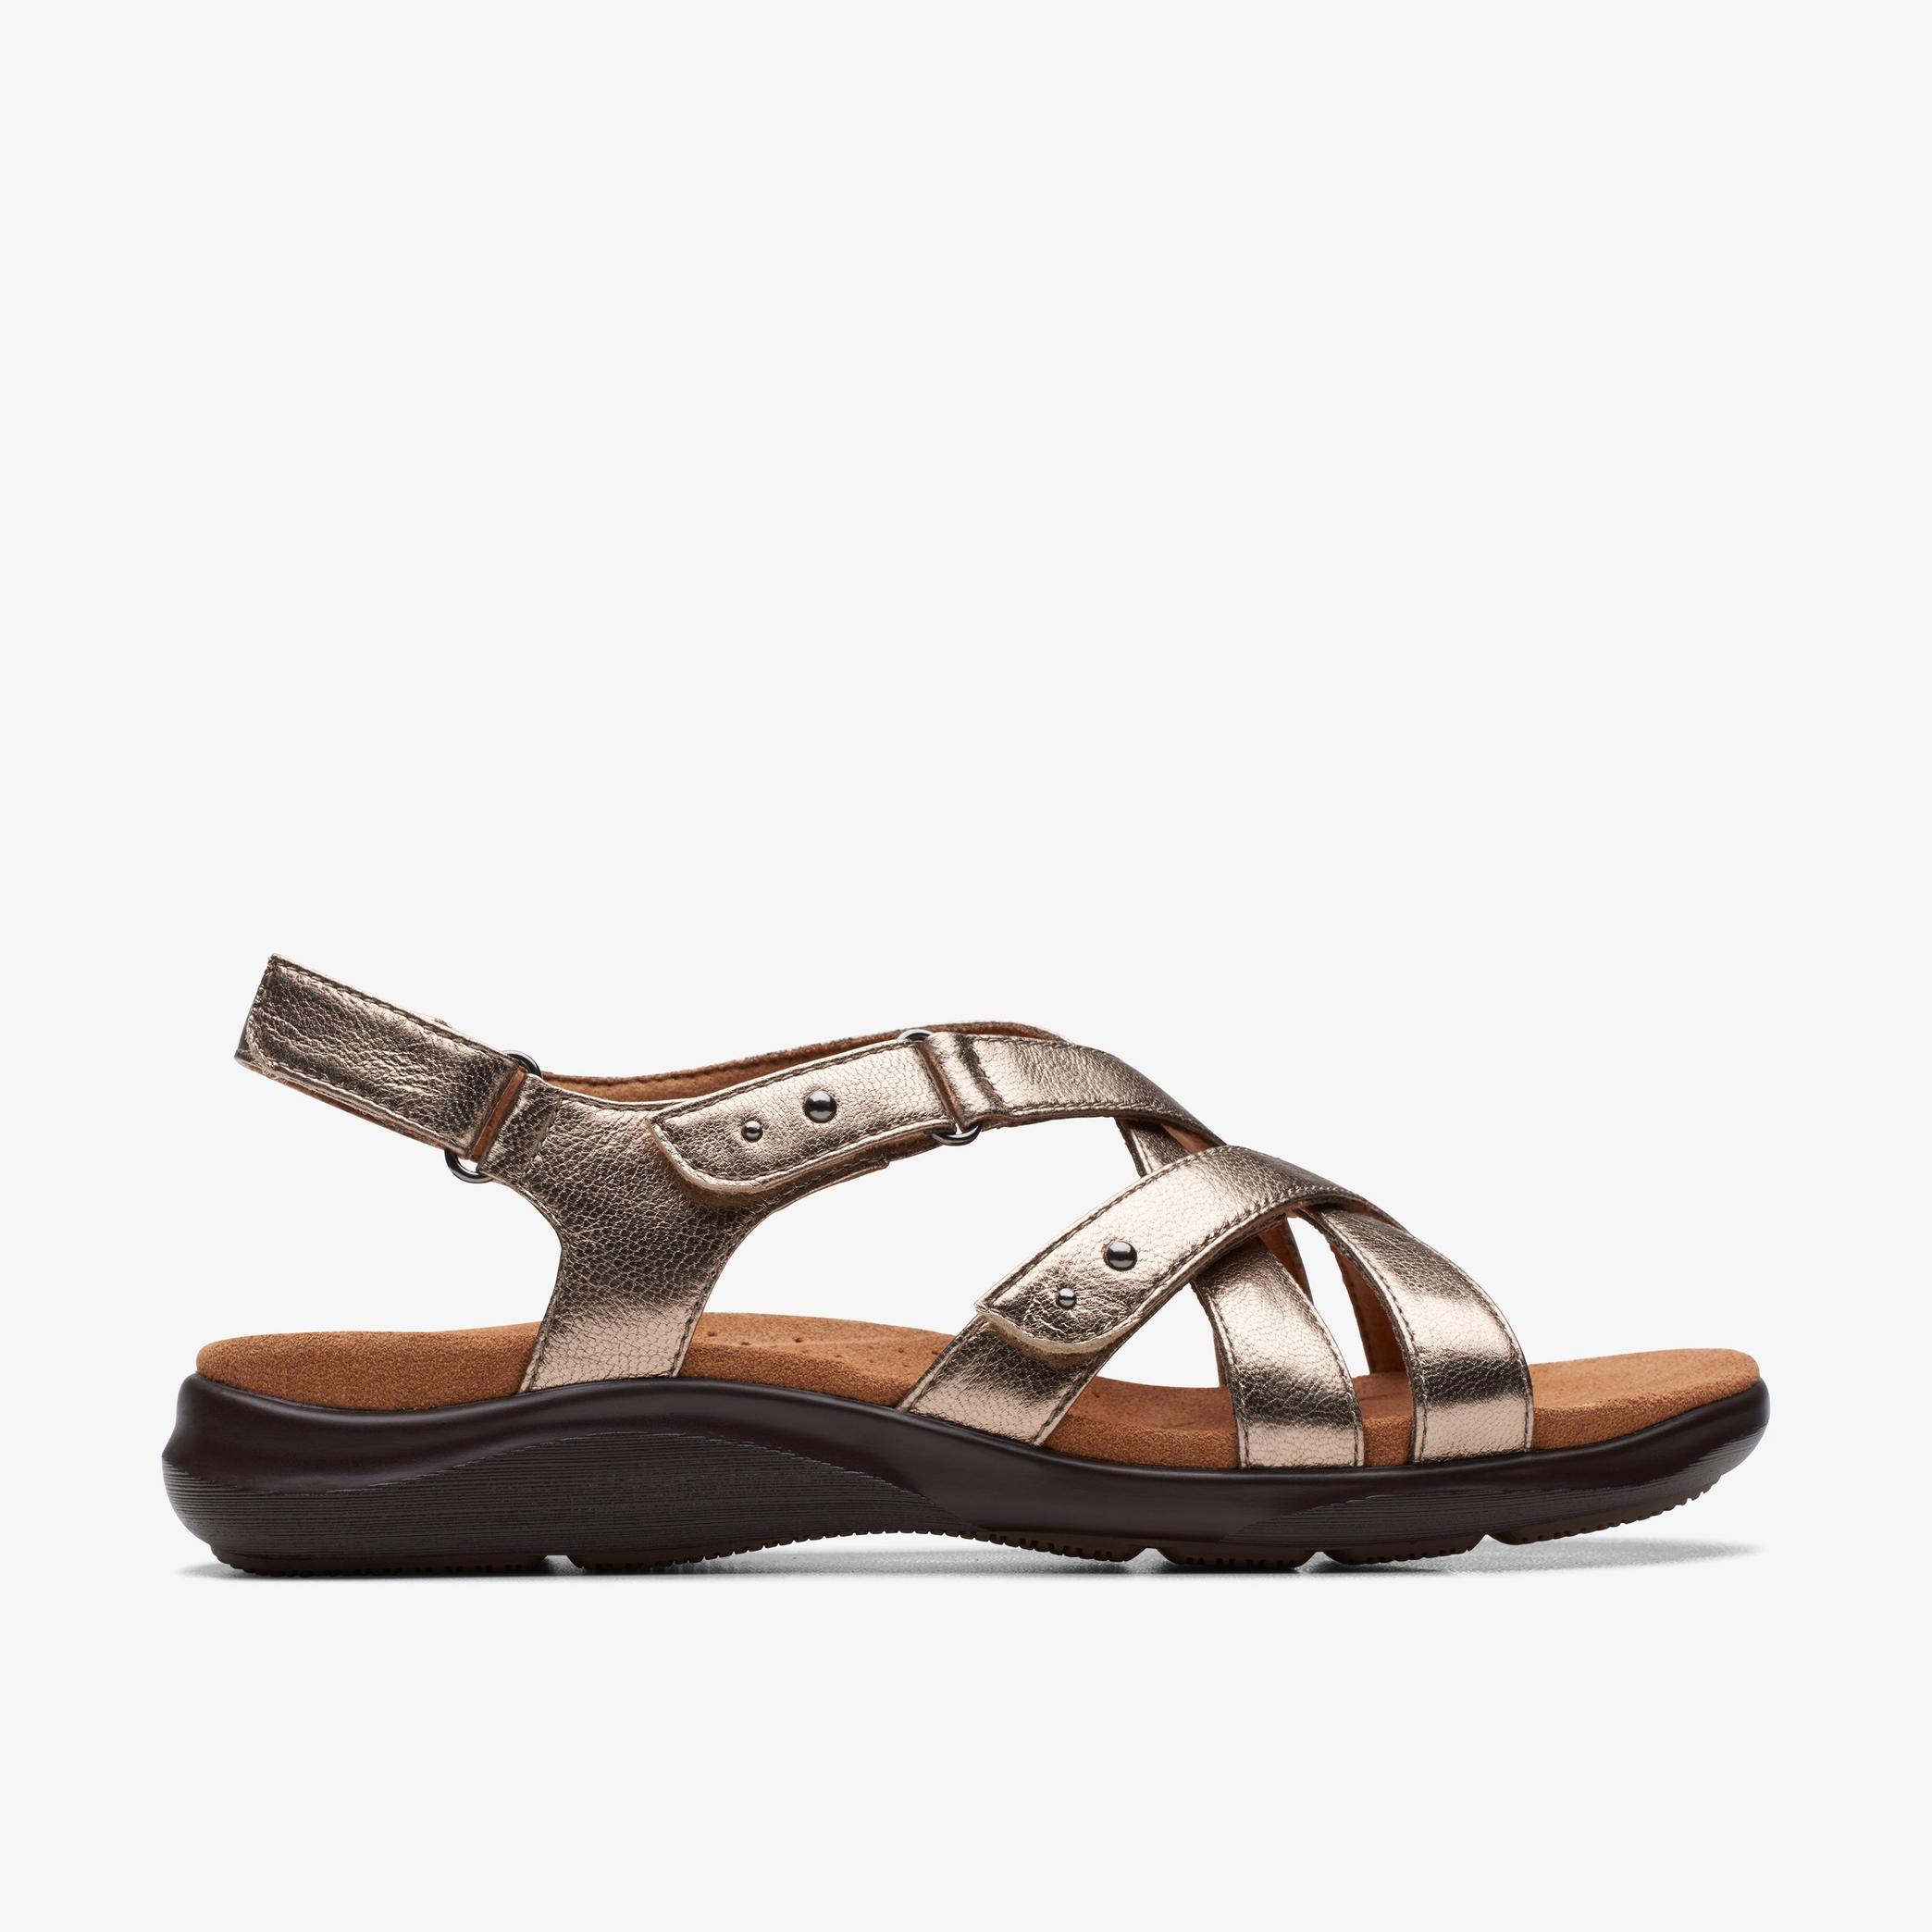 Kitly Go Metallic Flat Sandals, view 1 of 6